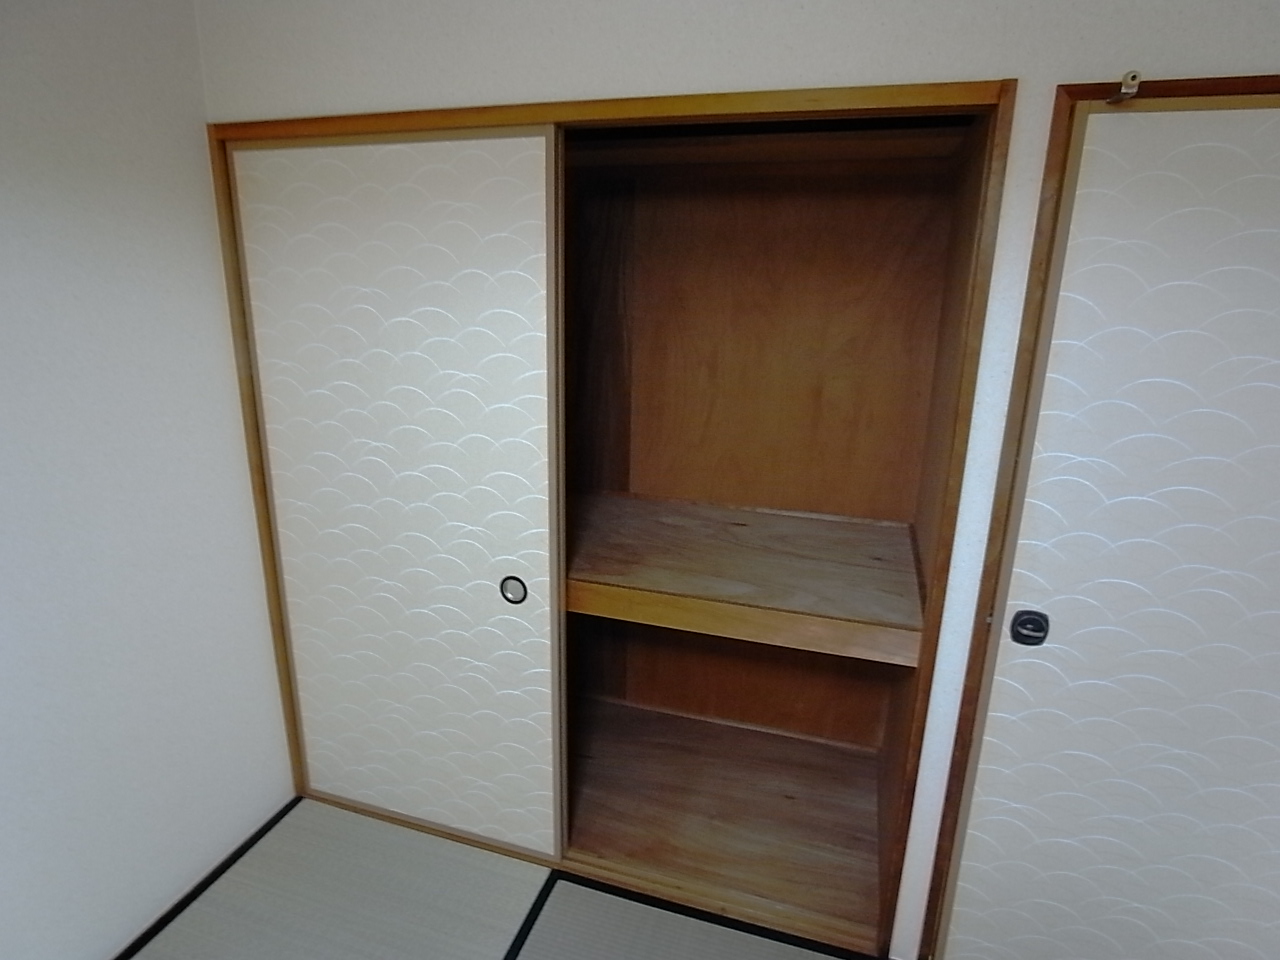 Living and room. Housed in the Japanese-style room! About about 1 Pledge of is the size